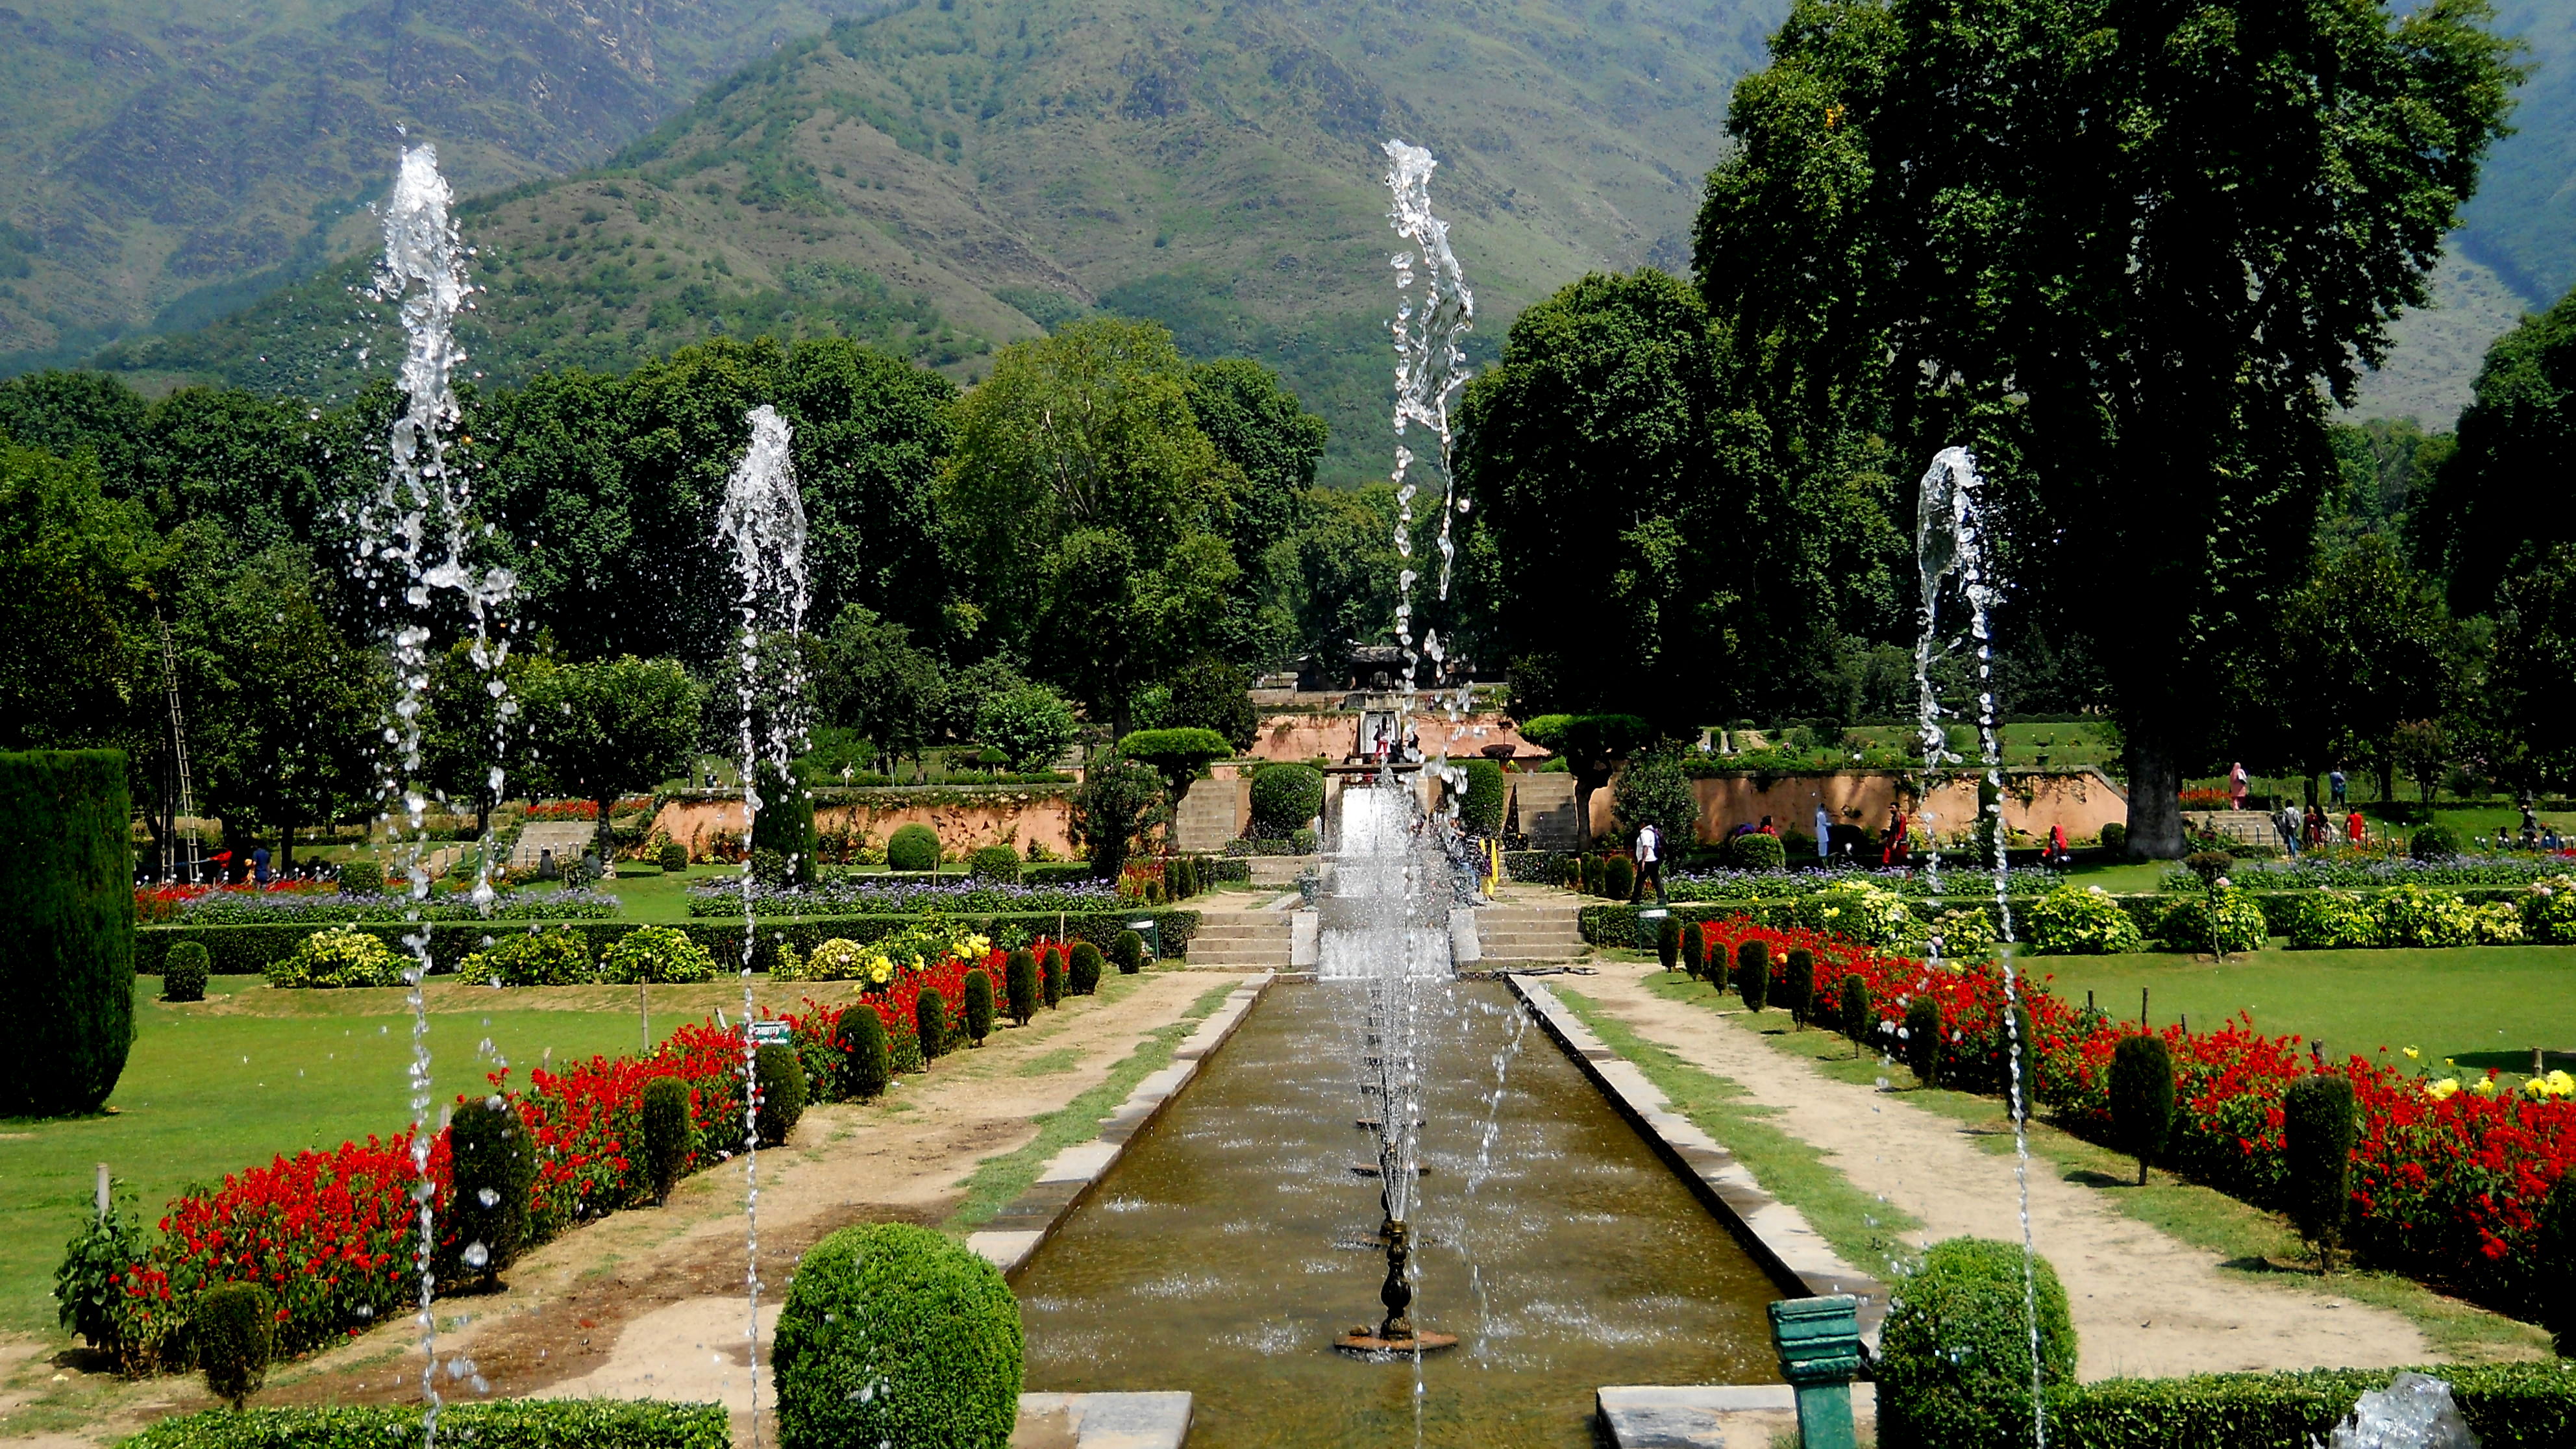 The Second Largest Mughal Garden